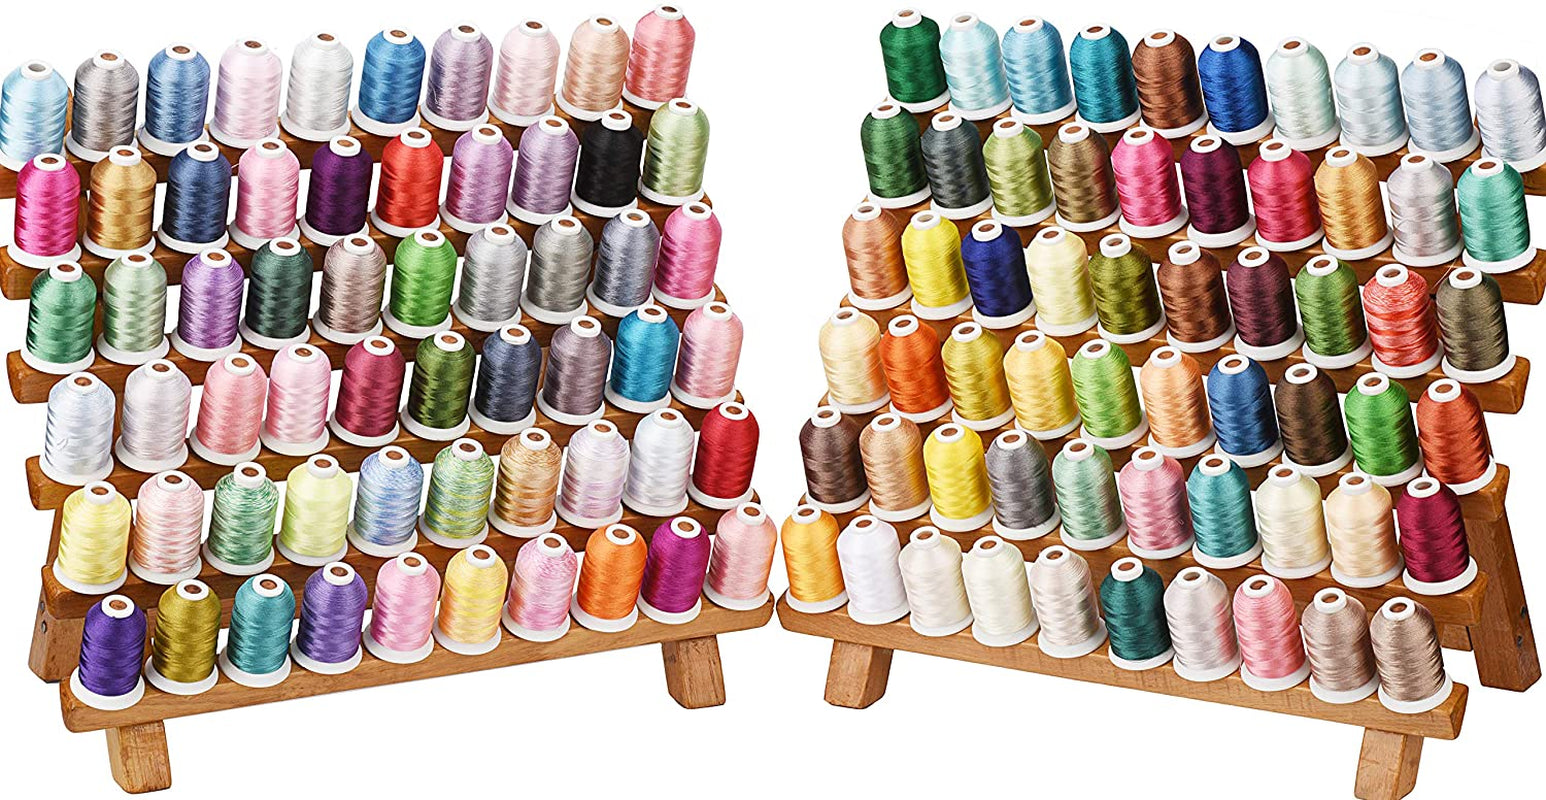 120 Madeira Colors Polyester Machine Embroidery Thread Kit 550Y(500M) Similar to Madeira and Robinson-Anton Colors 40 Weight for Home Embroidery Sewing Machines